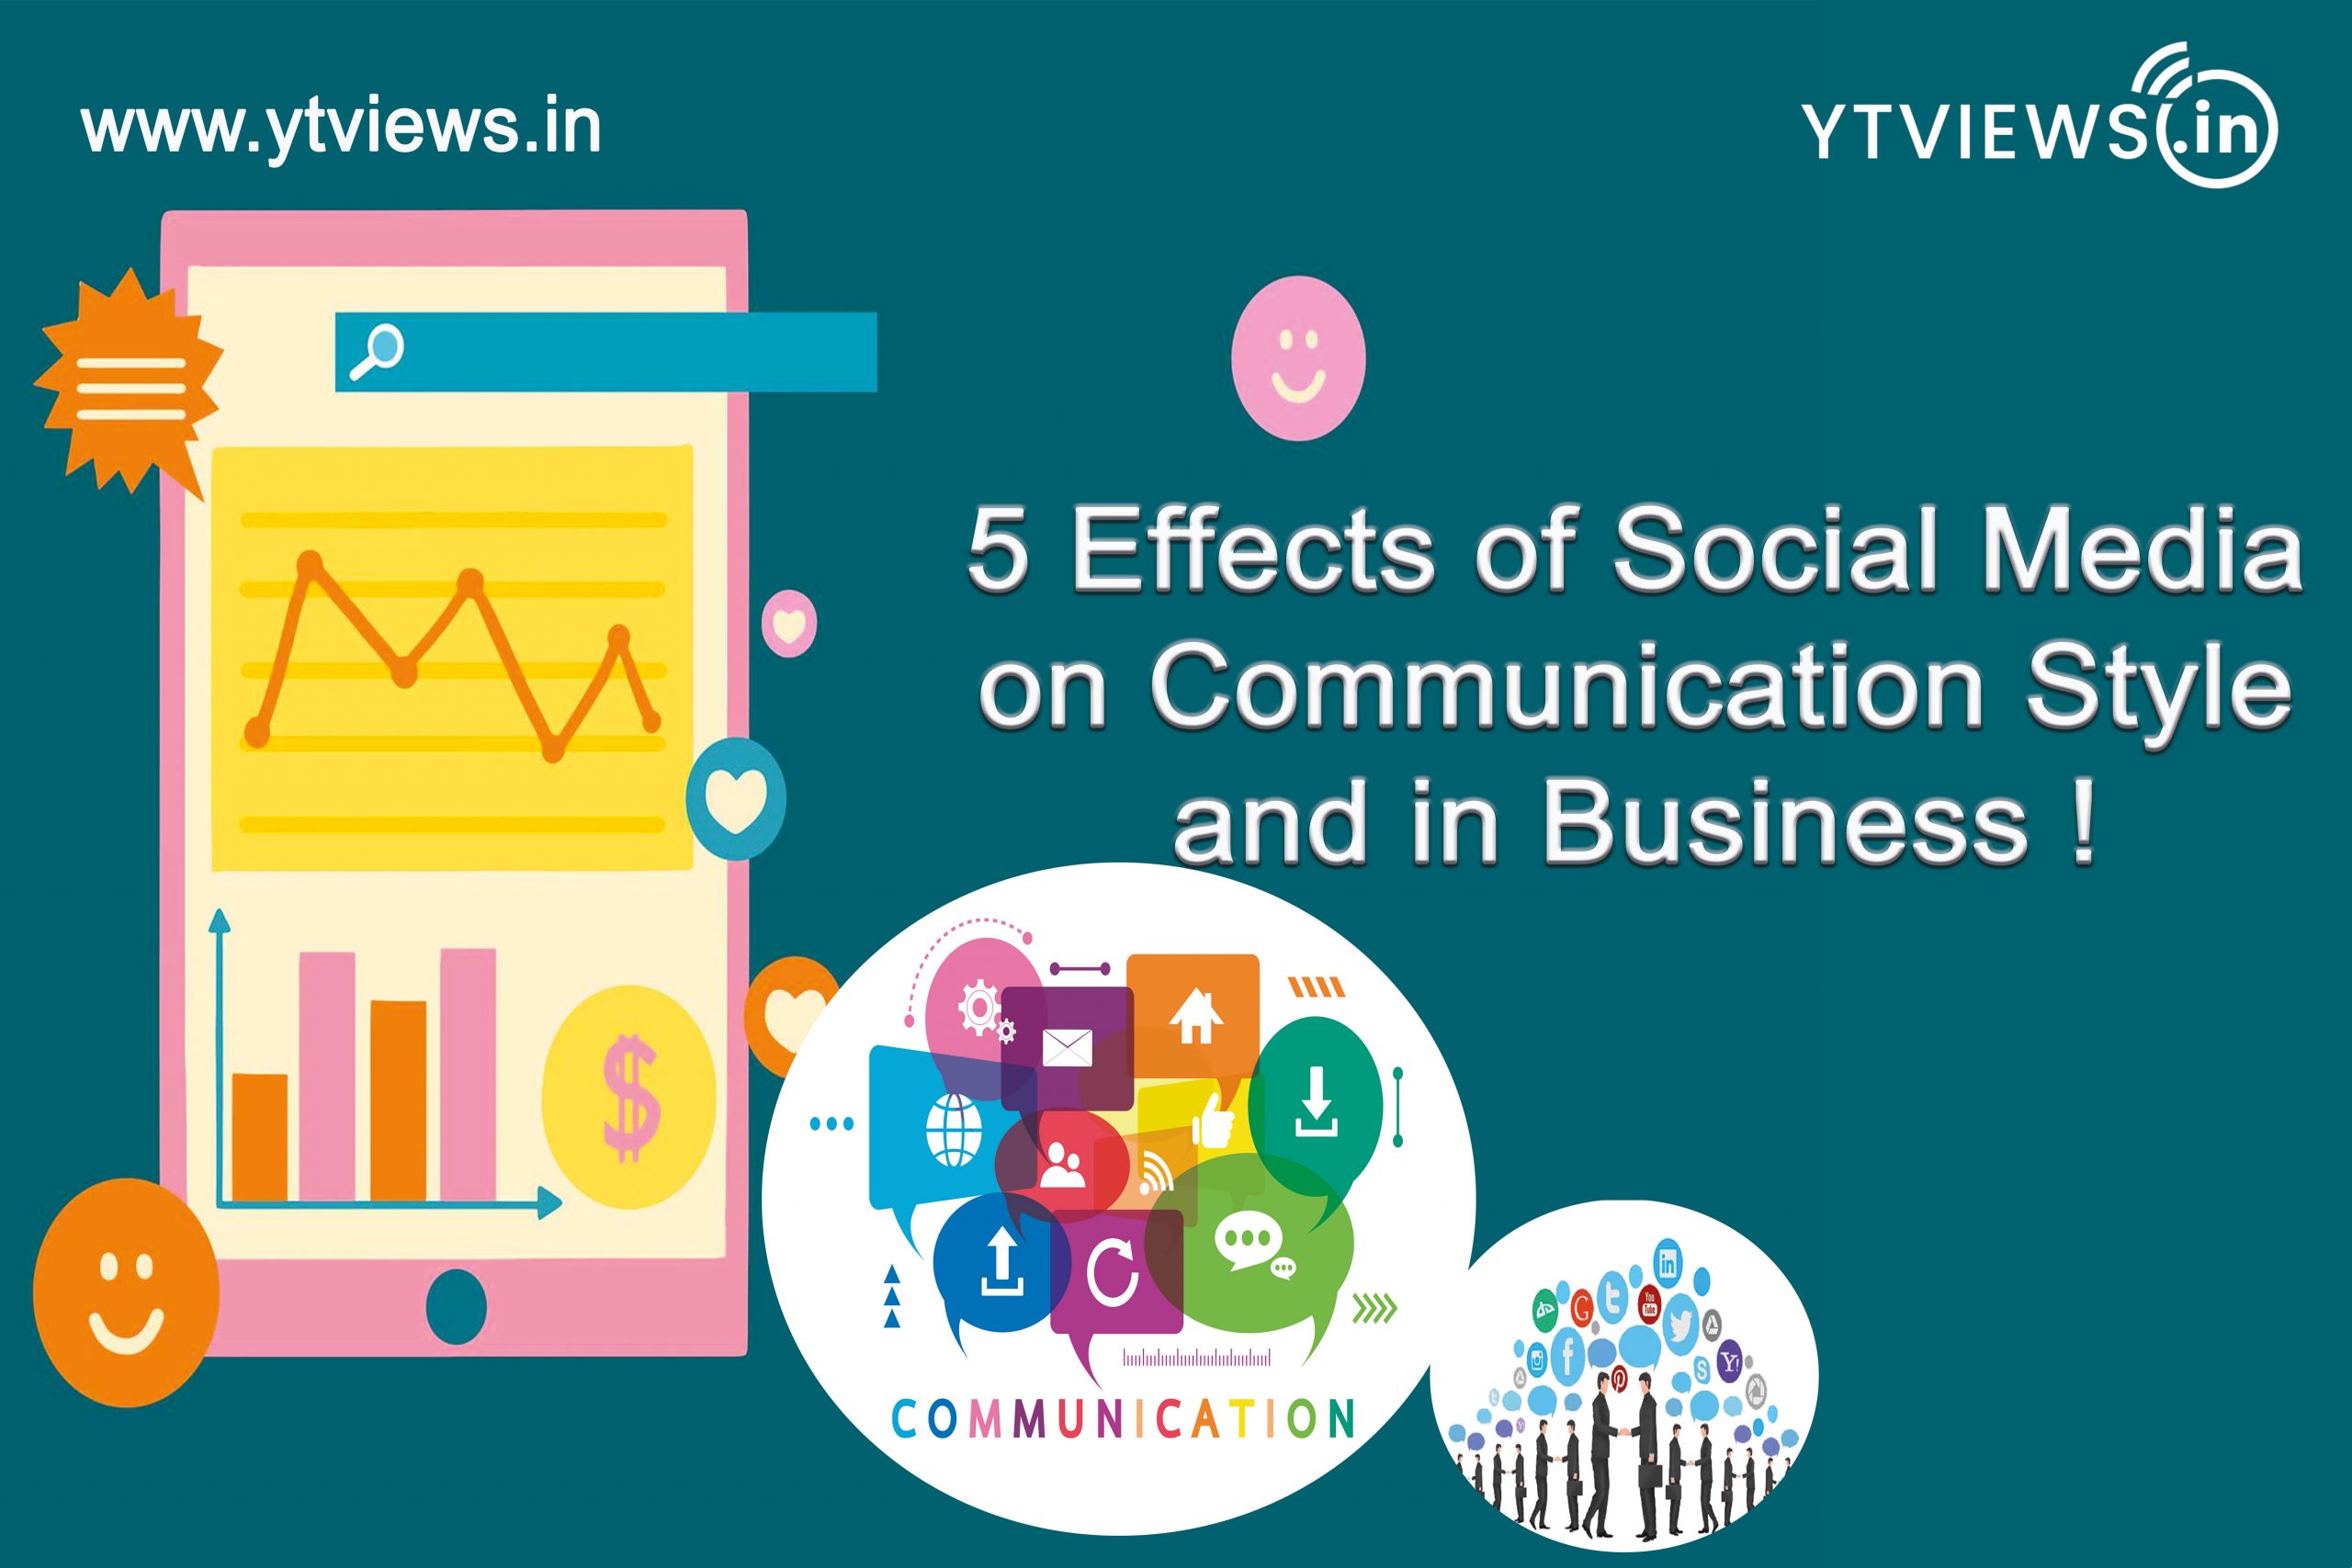 5 Effects of Social Media on Communication Style and in Business